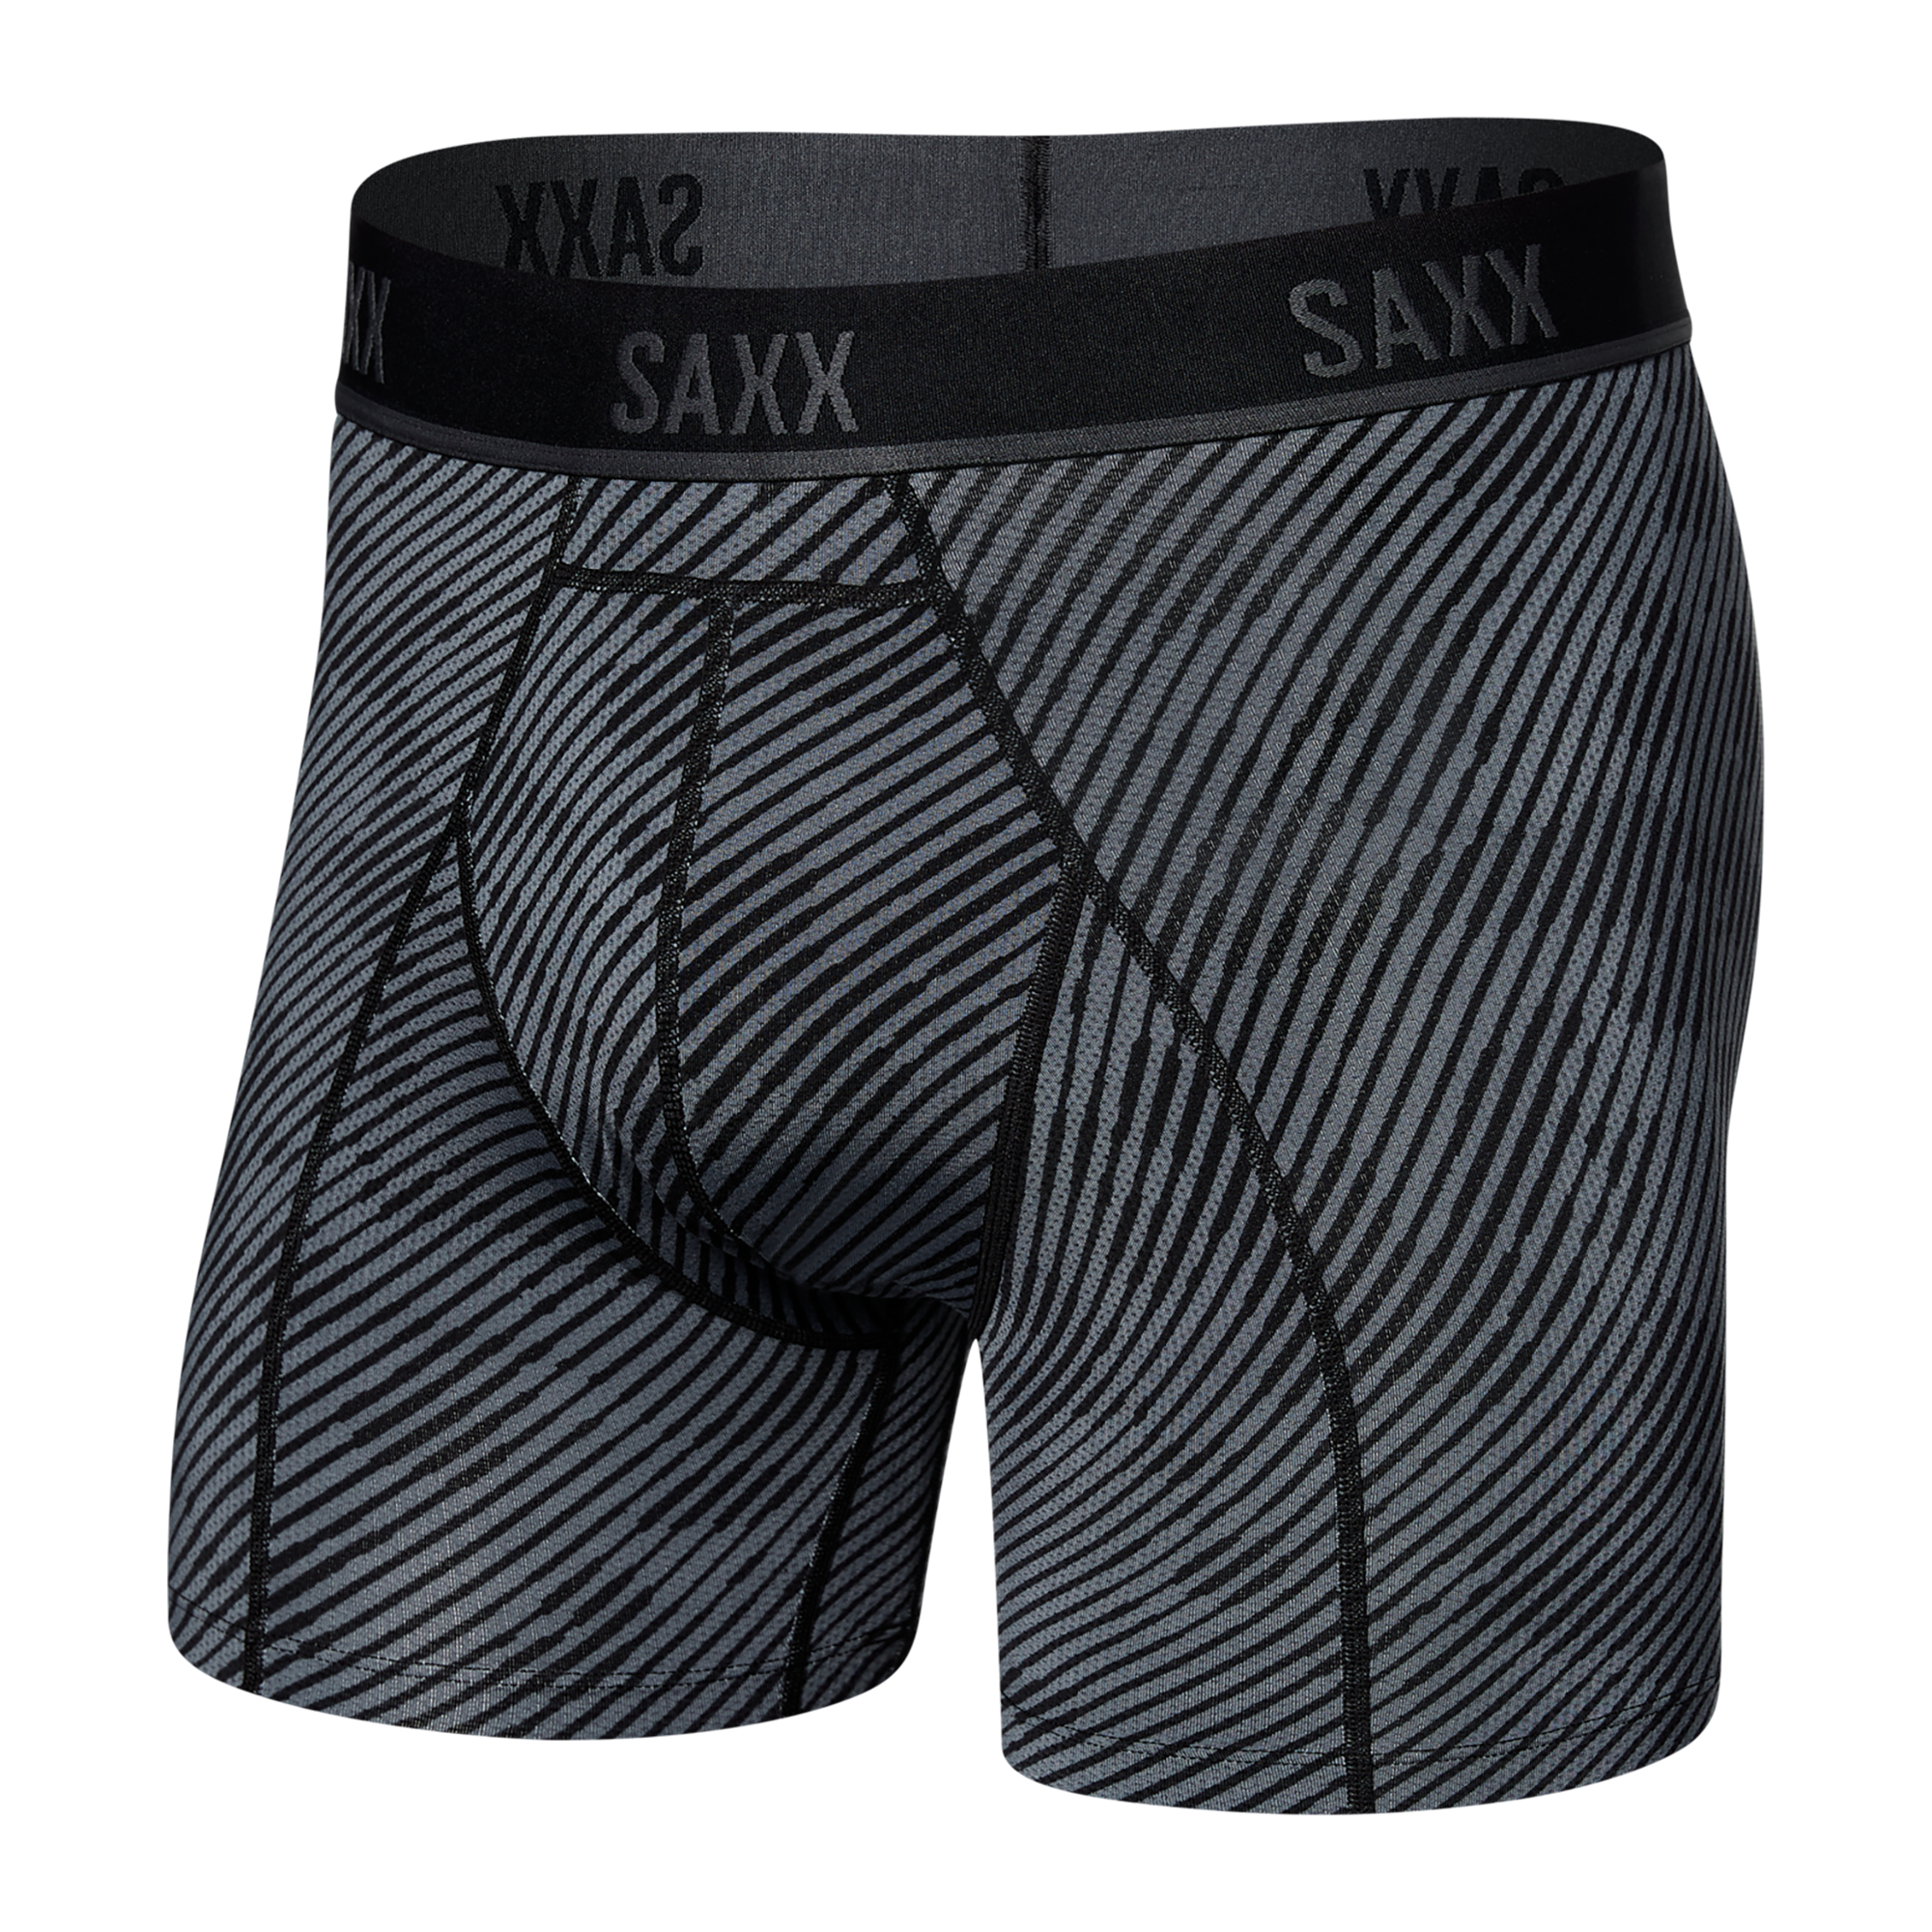 Sports Experts - Hinton, AB - Shop the biggest SAXX selection anywhere!  Black Friday all SAXX are 20% off! Intersport carries EVERY style and color  of SAXX Underwear that exist and we